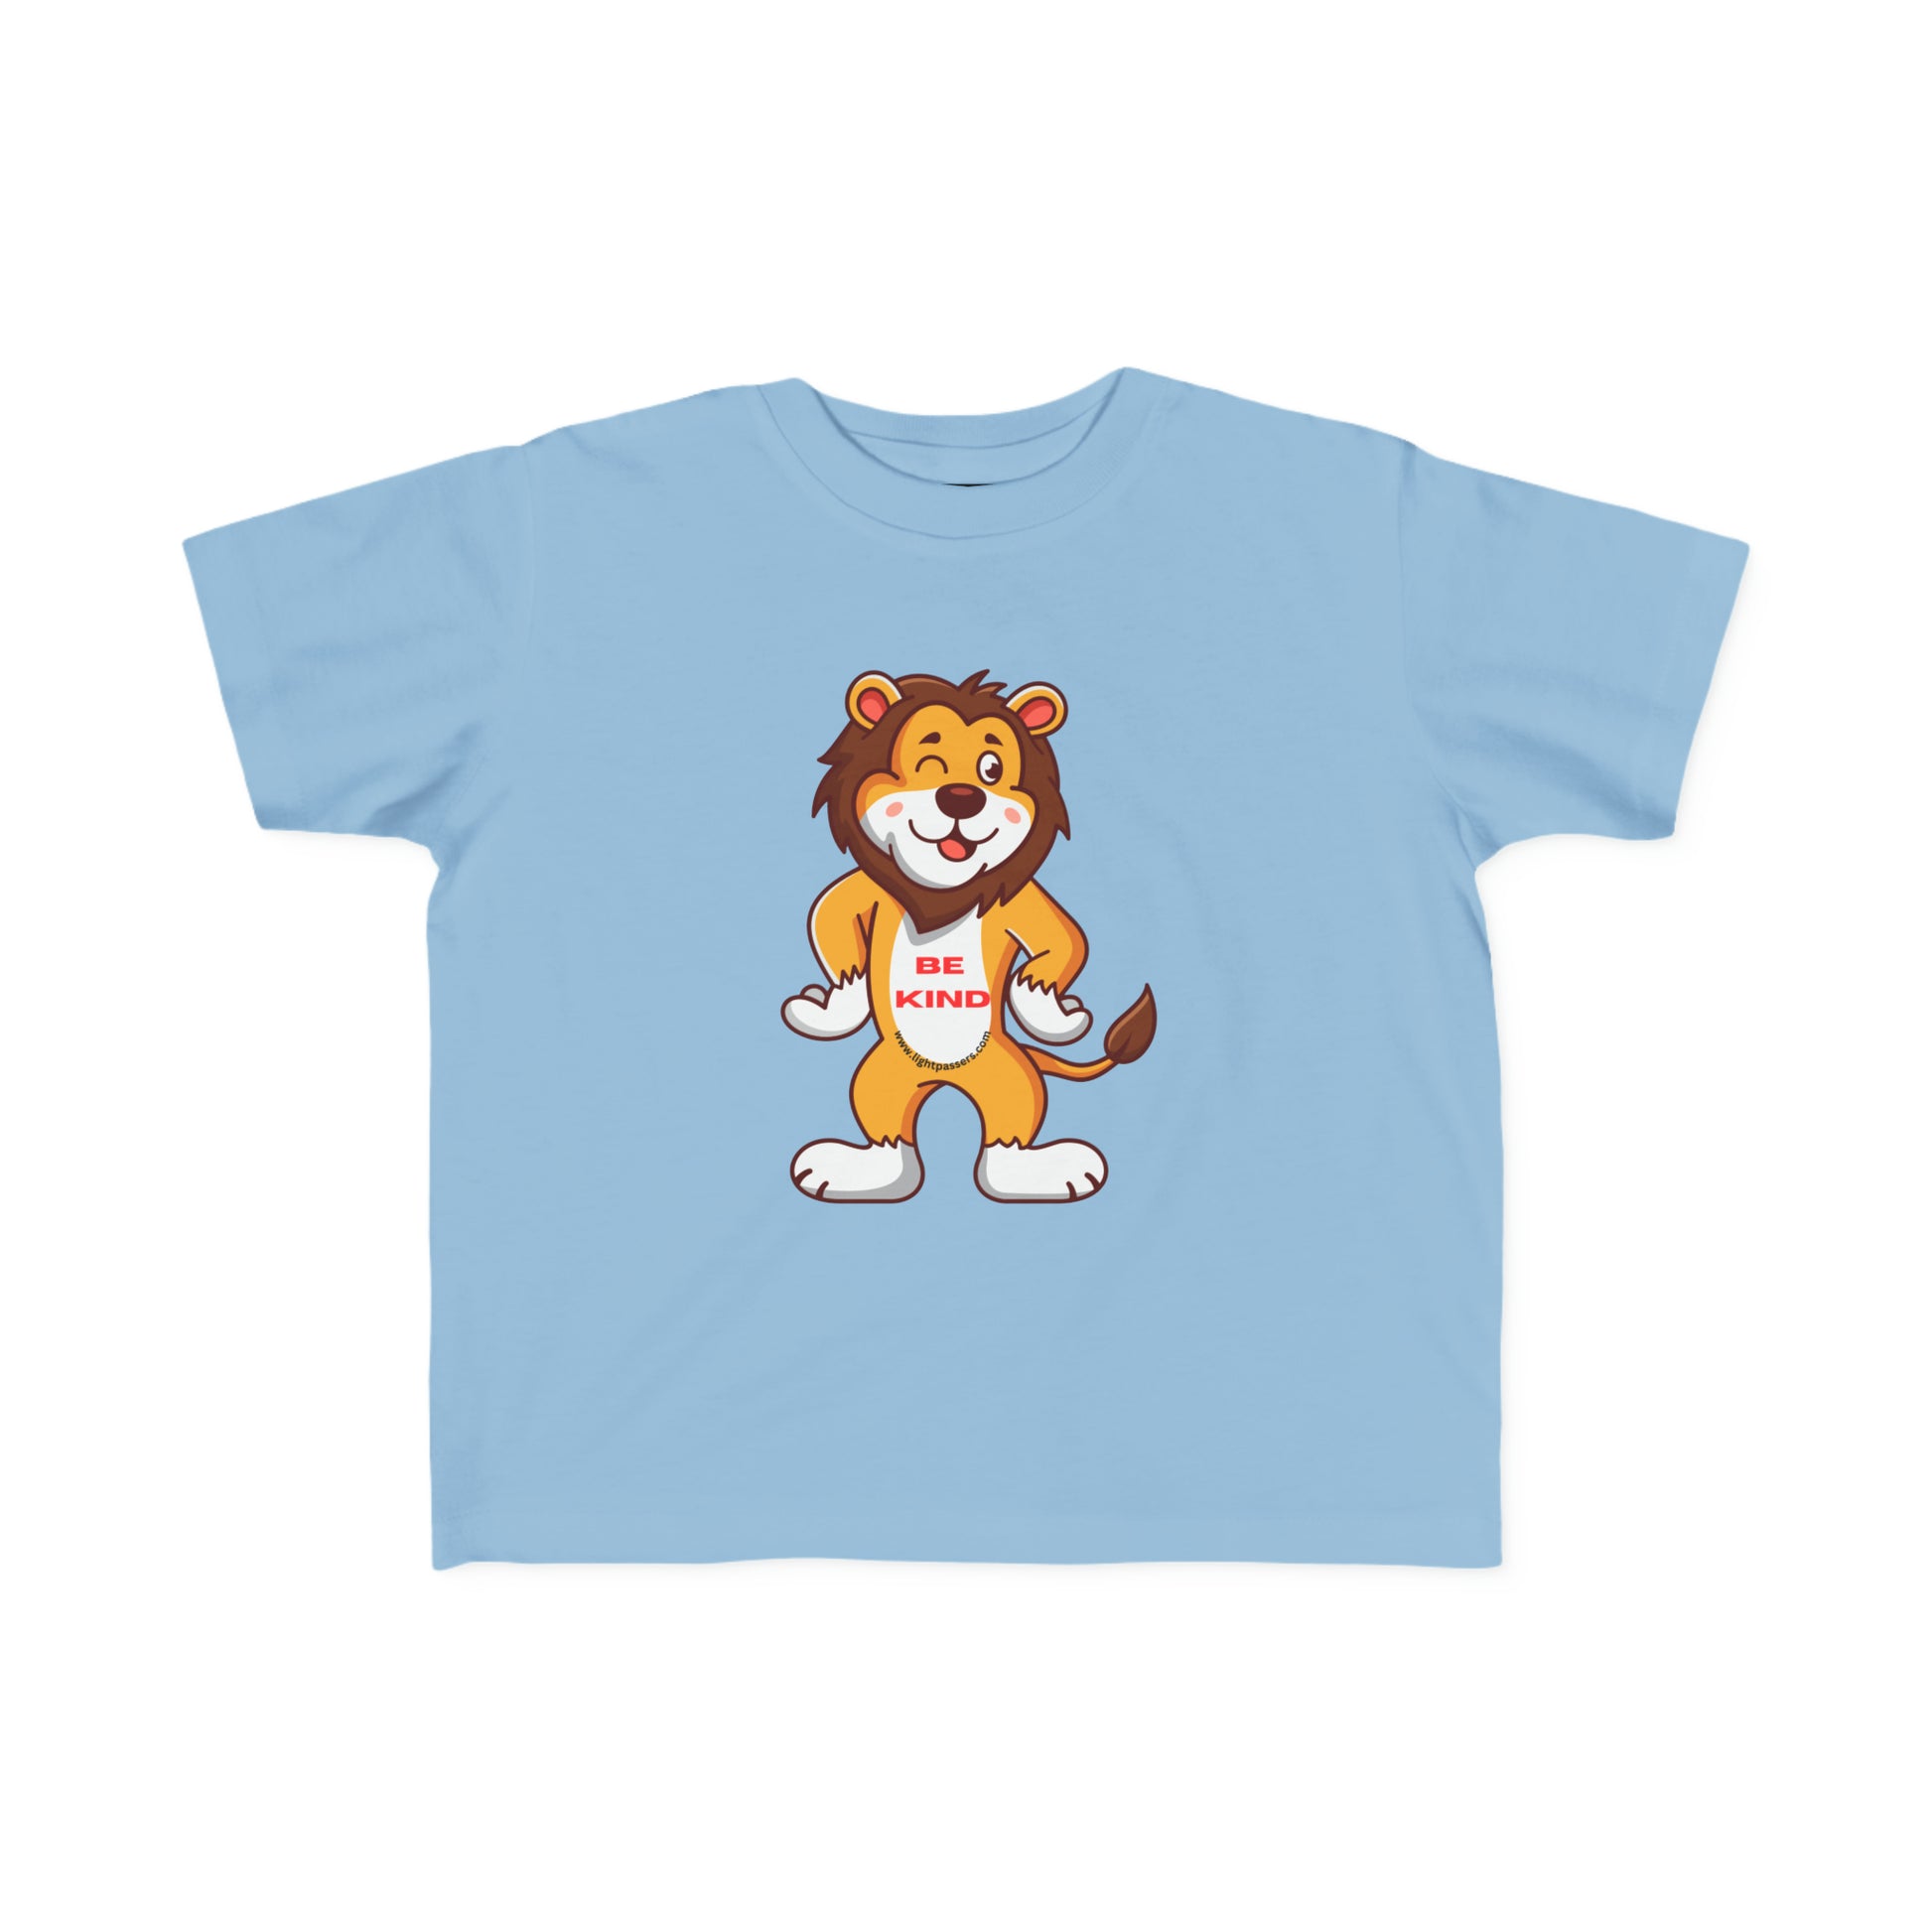 A toddler's blue t-shirt featuring a cartoon lion design, ideal for sensitive skin. Made of 100% combed cotton, light fabric, durable print, tear-away label, and a classic fit.